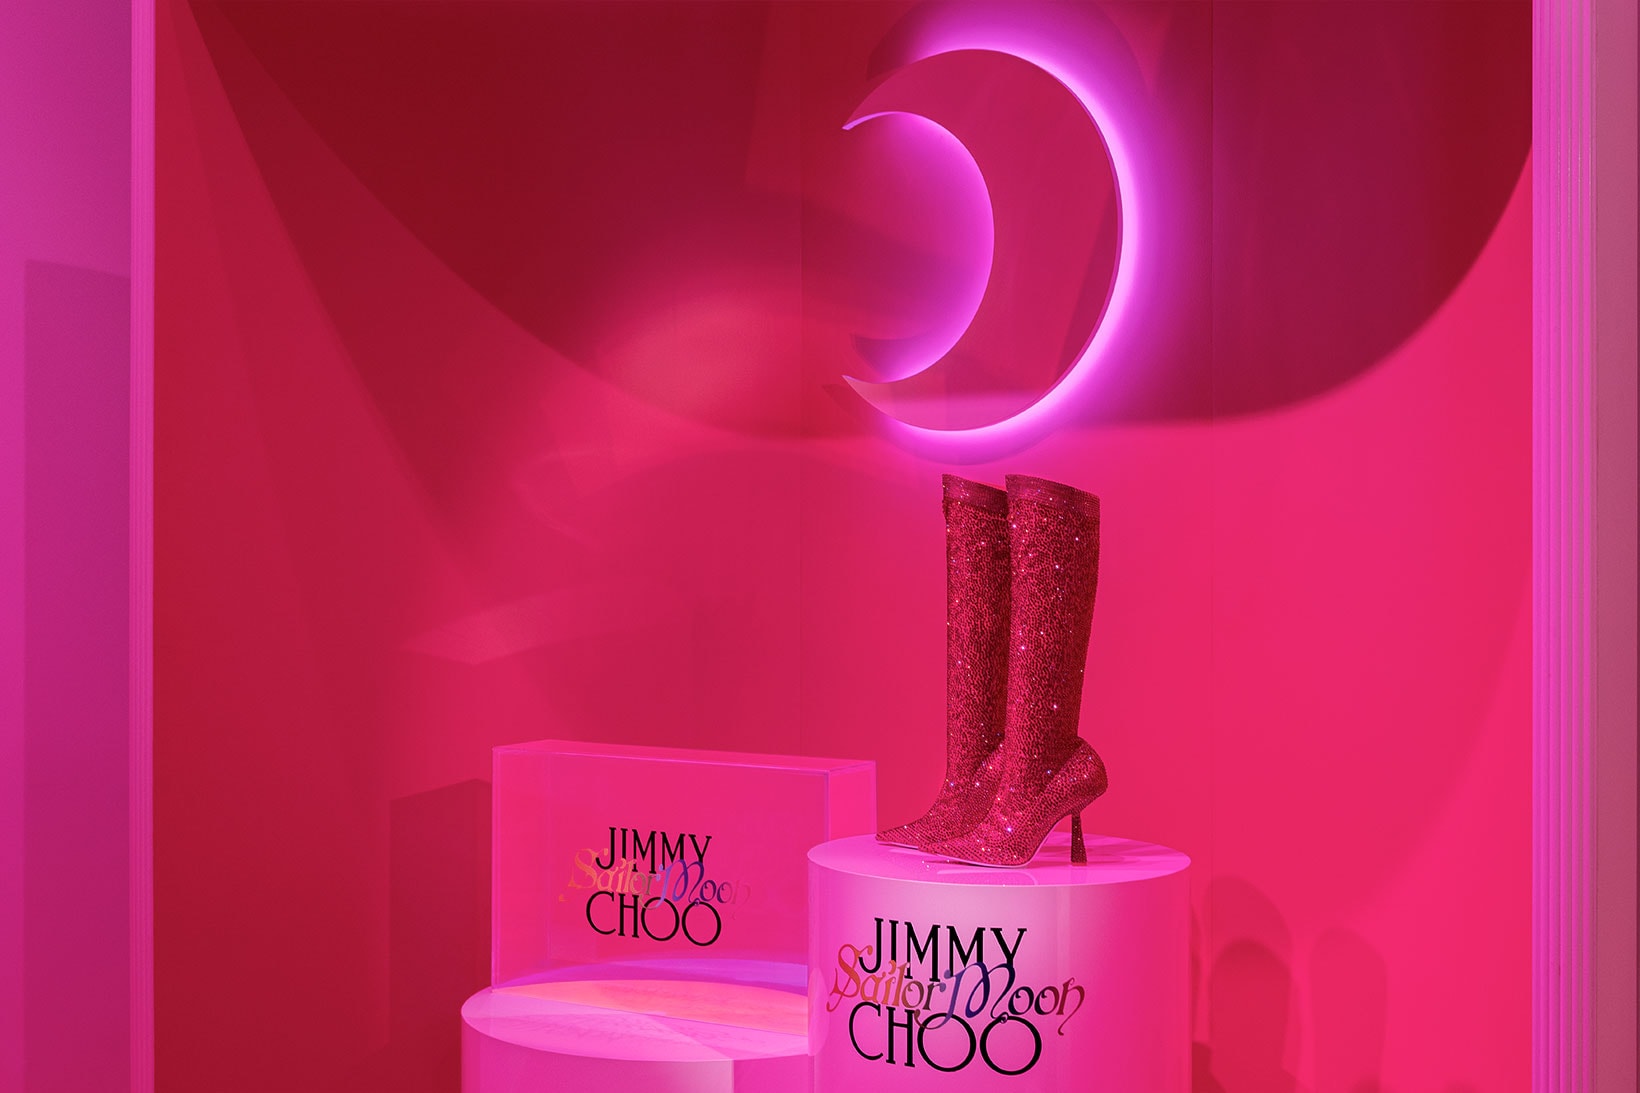 You're Going to Want Every Piece in Jimmy Choo's 'Sailor Moon